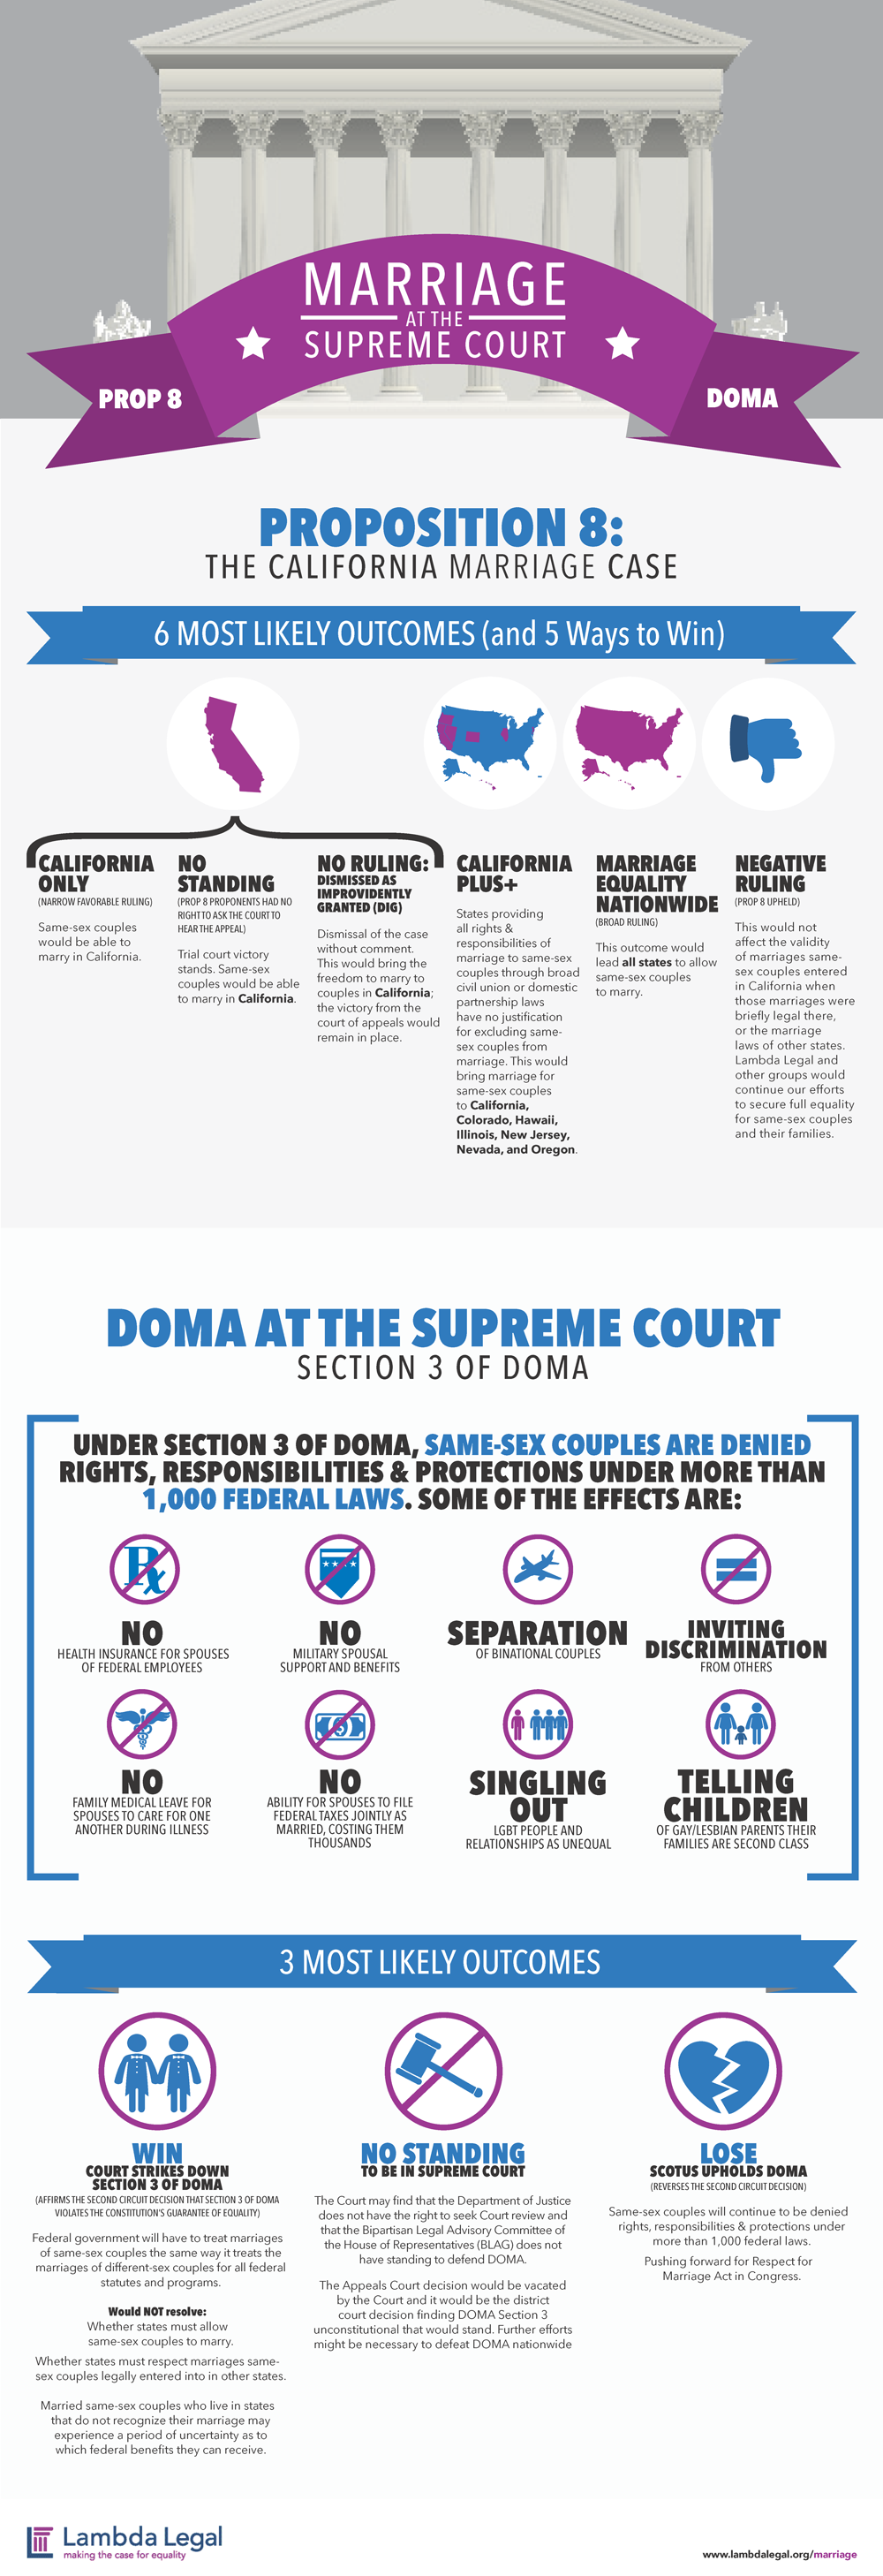 Lambda Legal offers infographic on possible impending SCOTUS gay marriage opinions